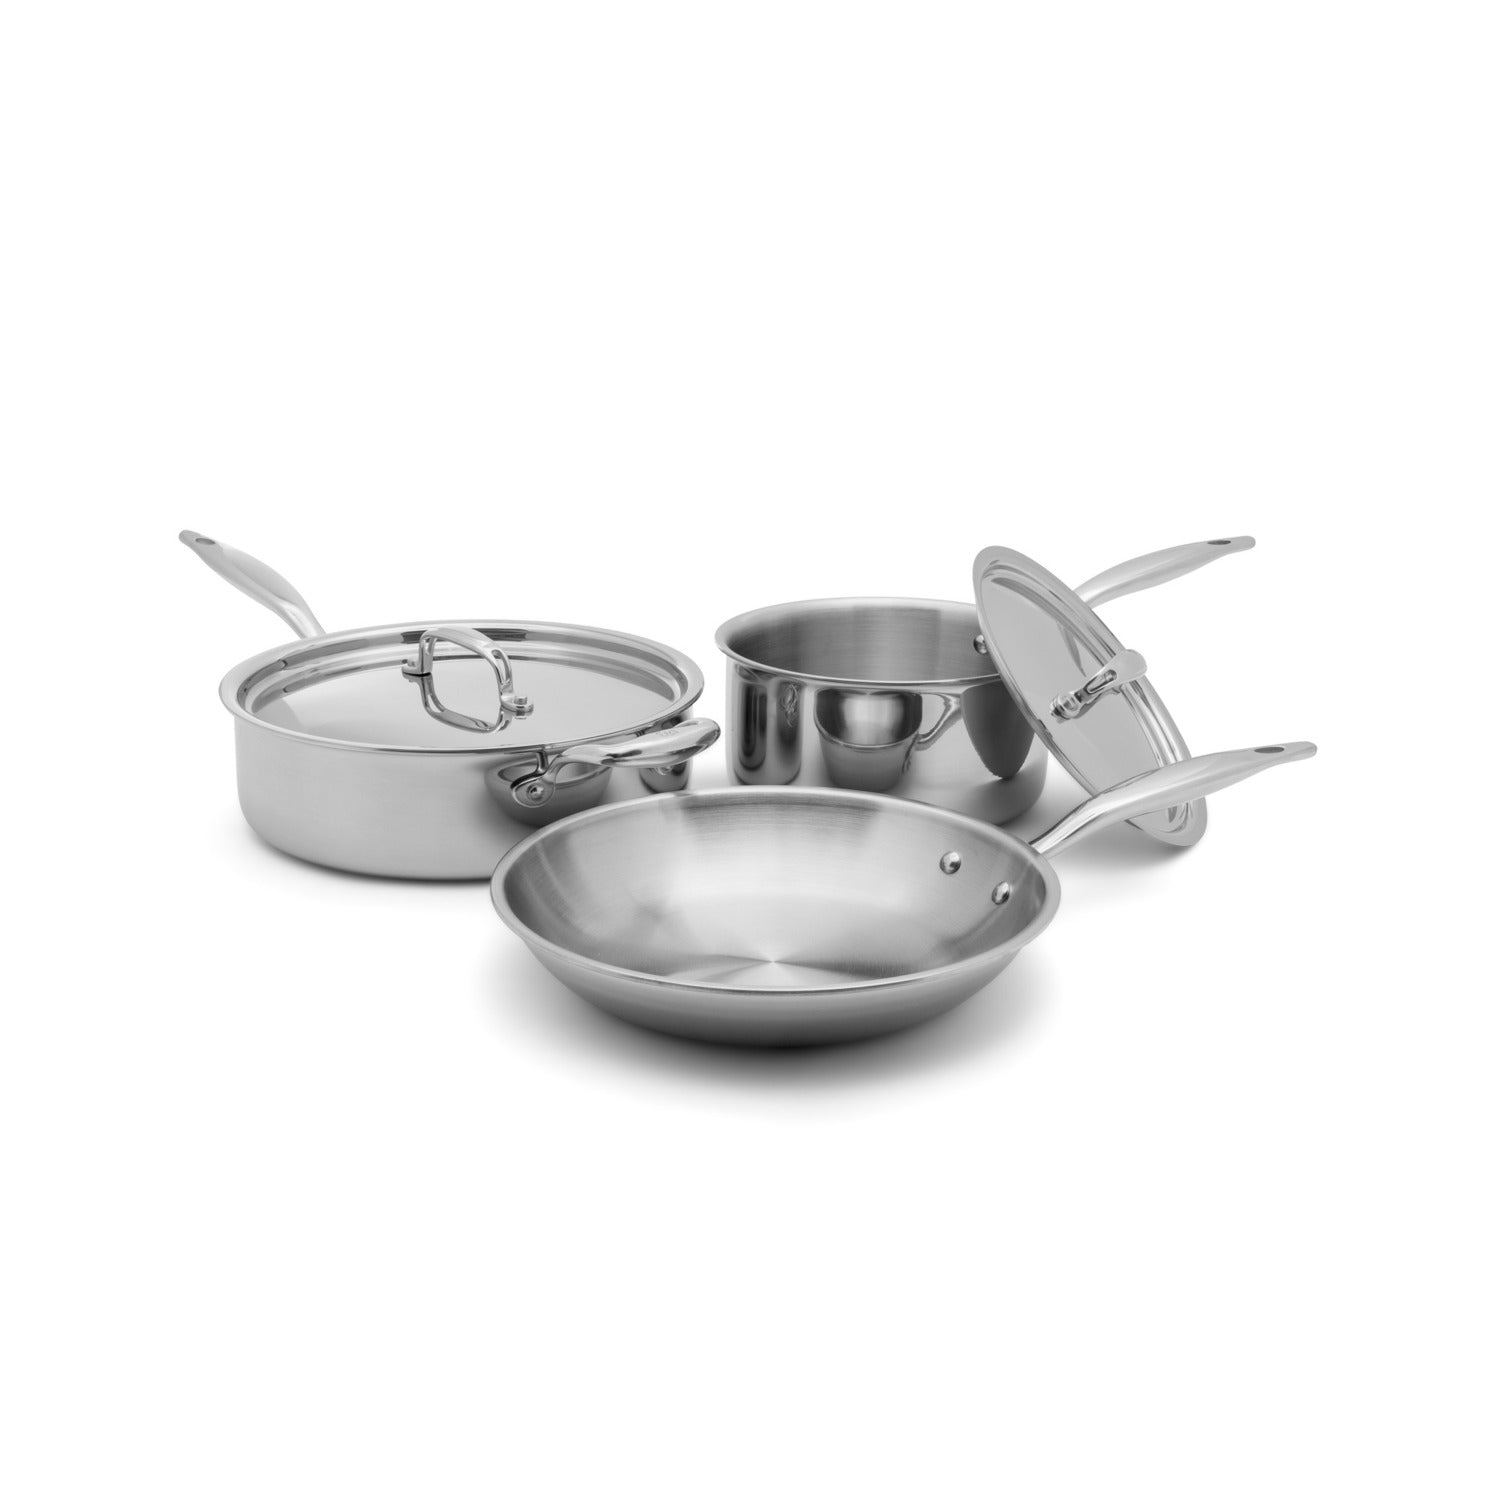  JFJ 5-Ply DE Stainless Steel 12-Piece Cookware Set   Professional Home Chef Grade Clad Pots and Pans Sets: Home & Kitchen